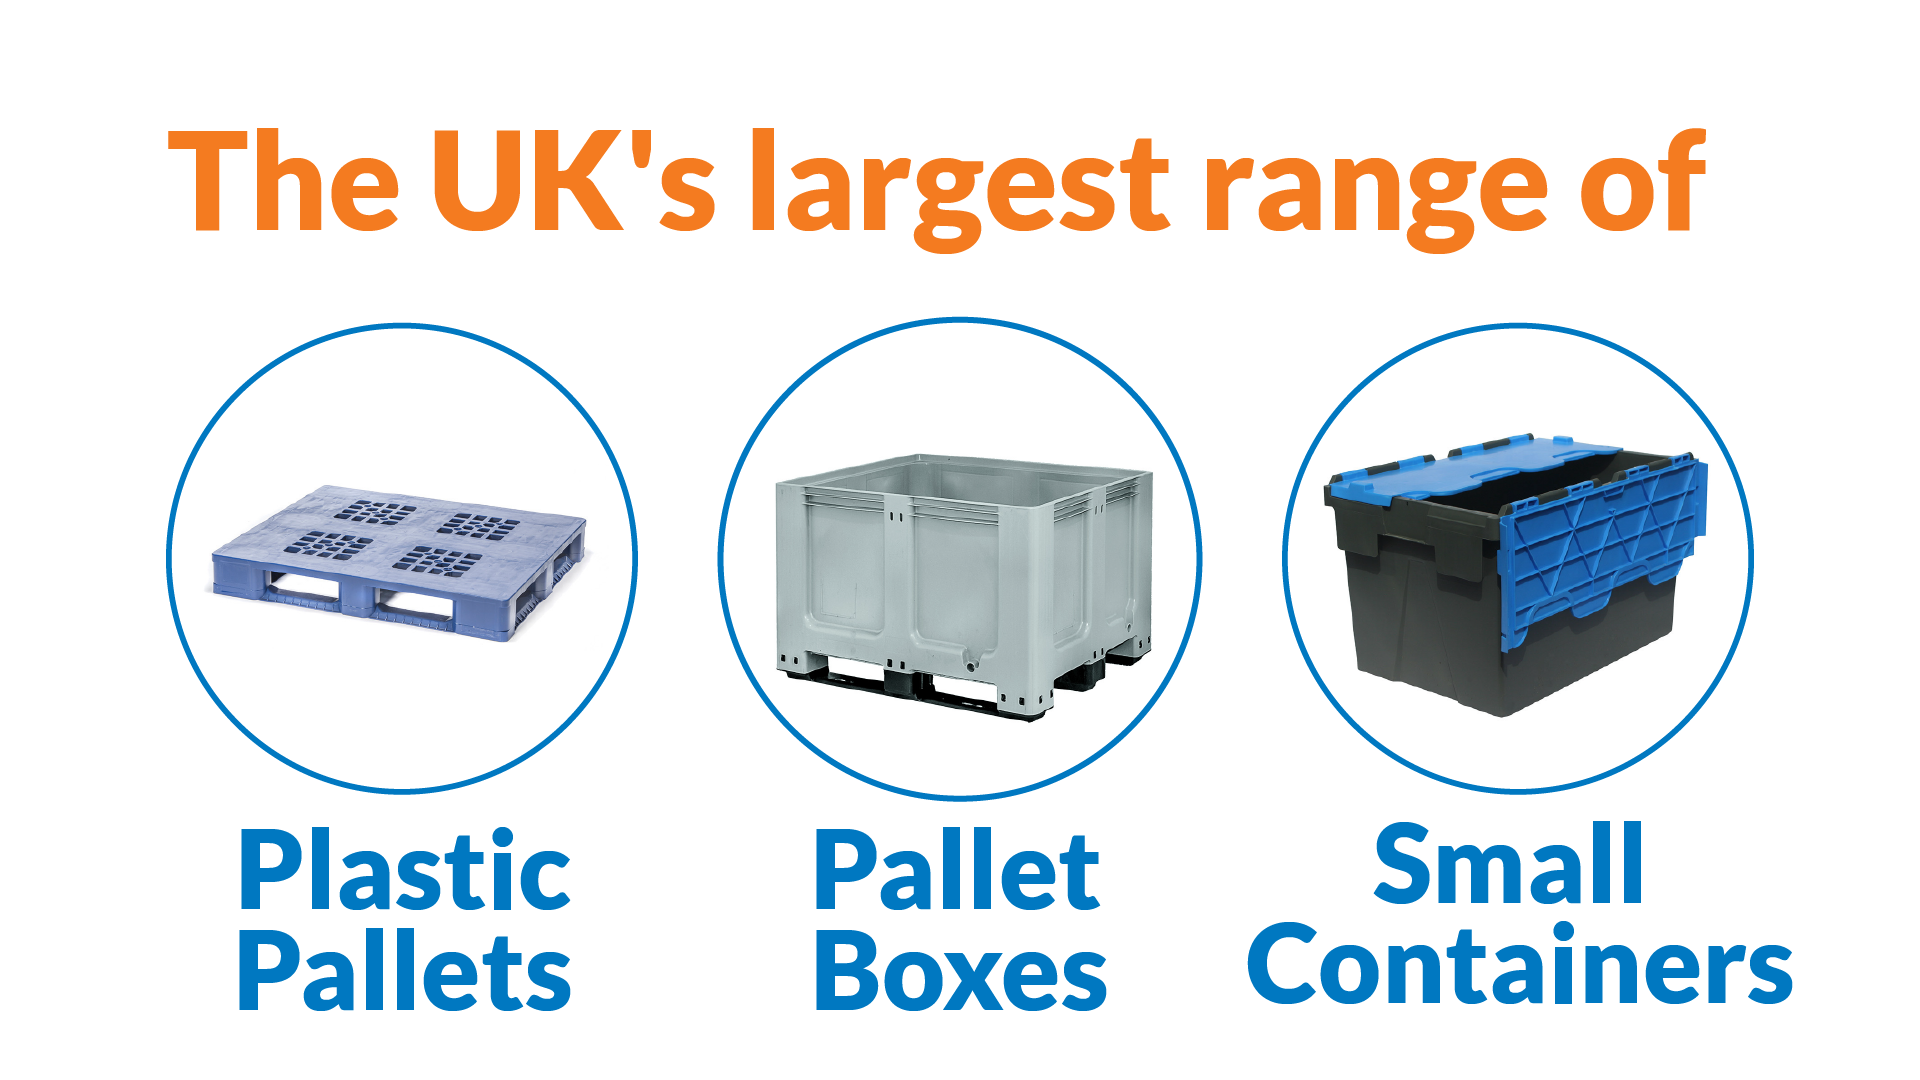 The UK's largest range of plastic pallets, pallet boxes and small containers